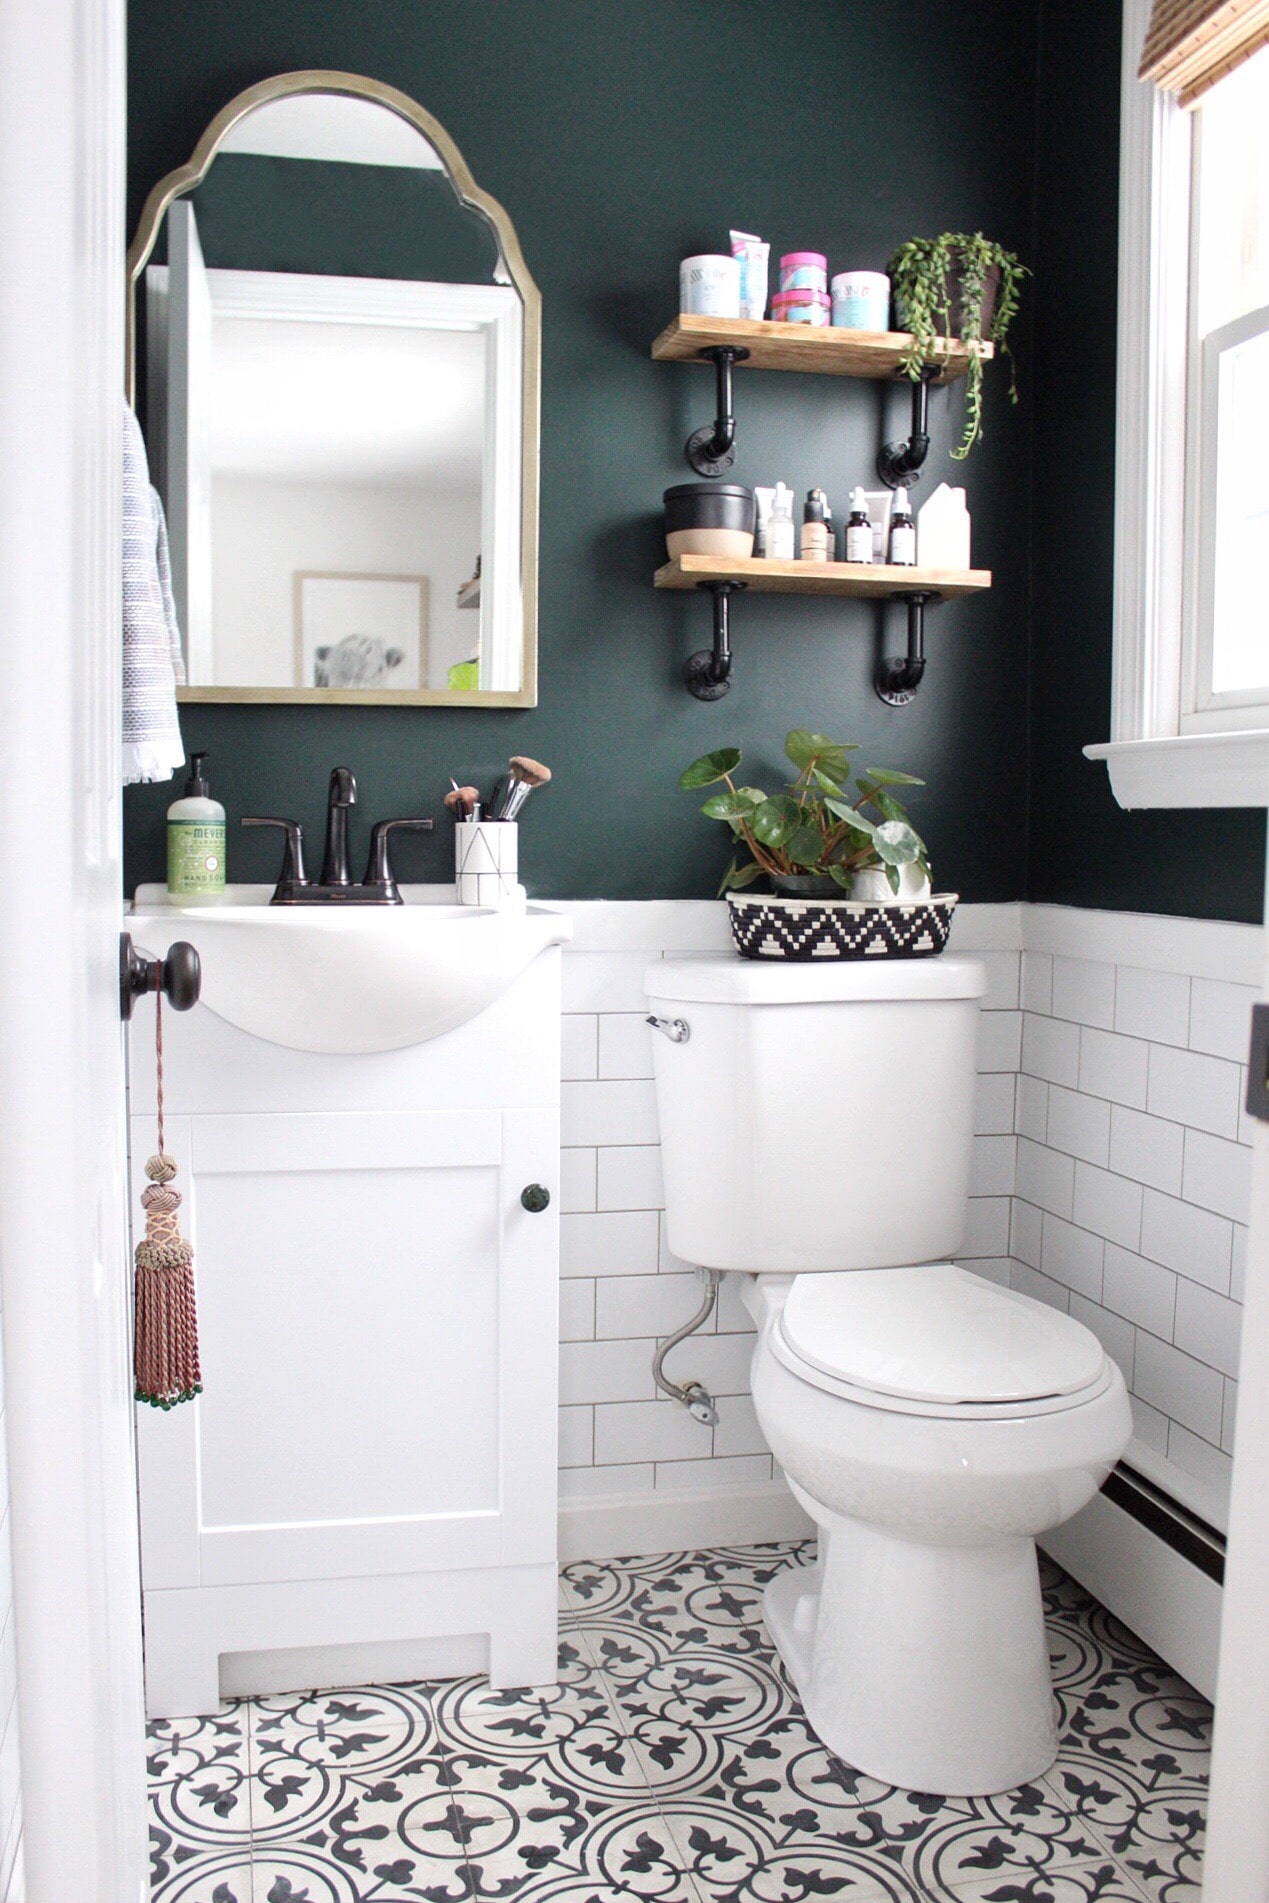 Powder room with white subway tile and upper walls painted Salamander by Benjamin Moore.